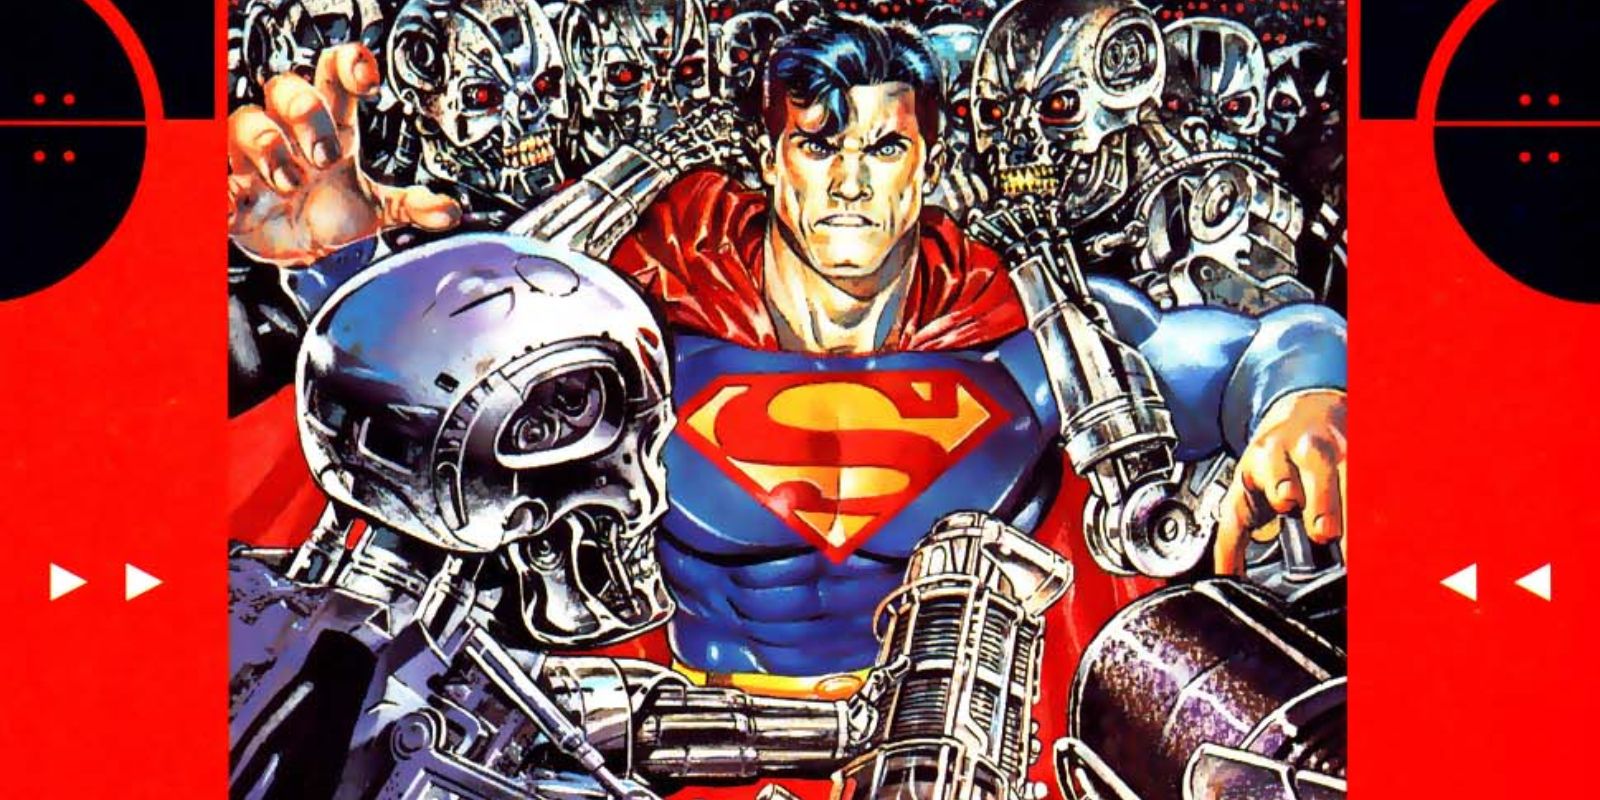 Was Superman the Key to The Terminators' Victory Over Mankind?